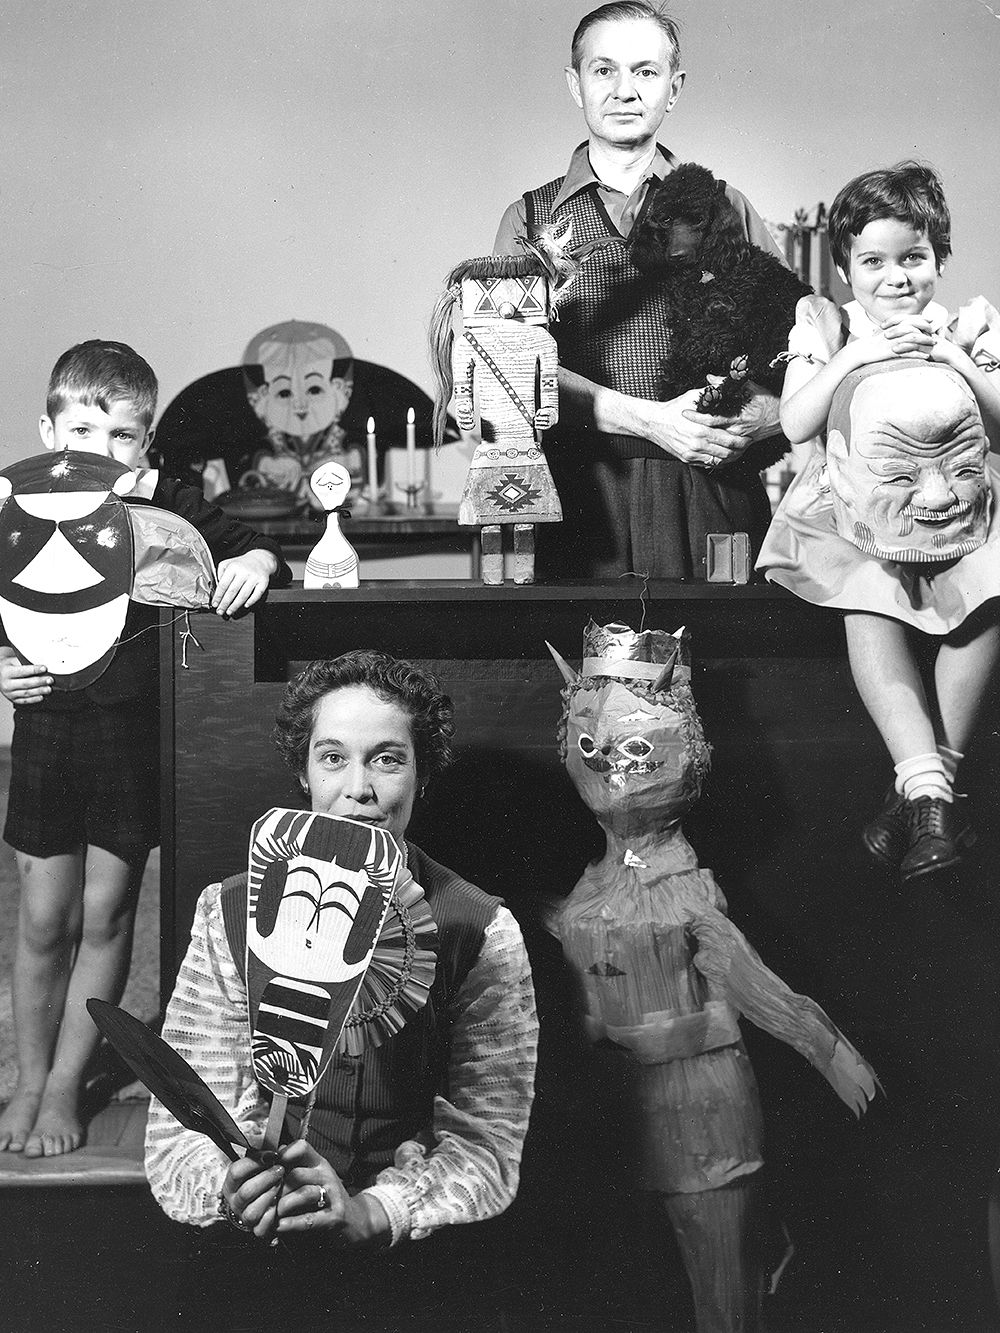 Alexander Girard and his family in a black and white portrait